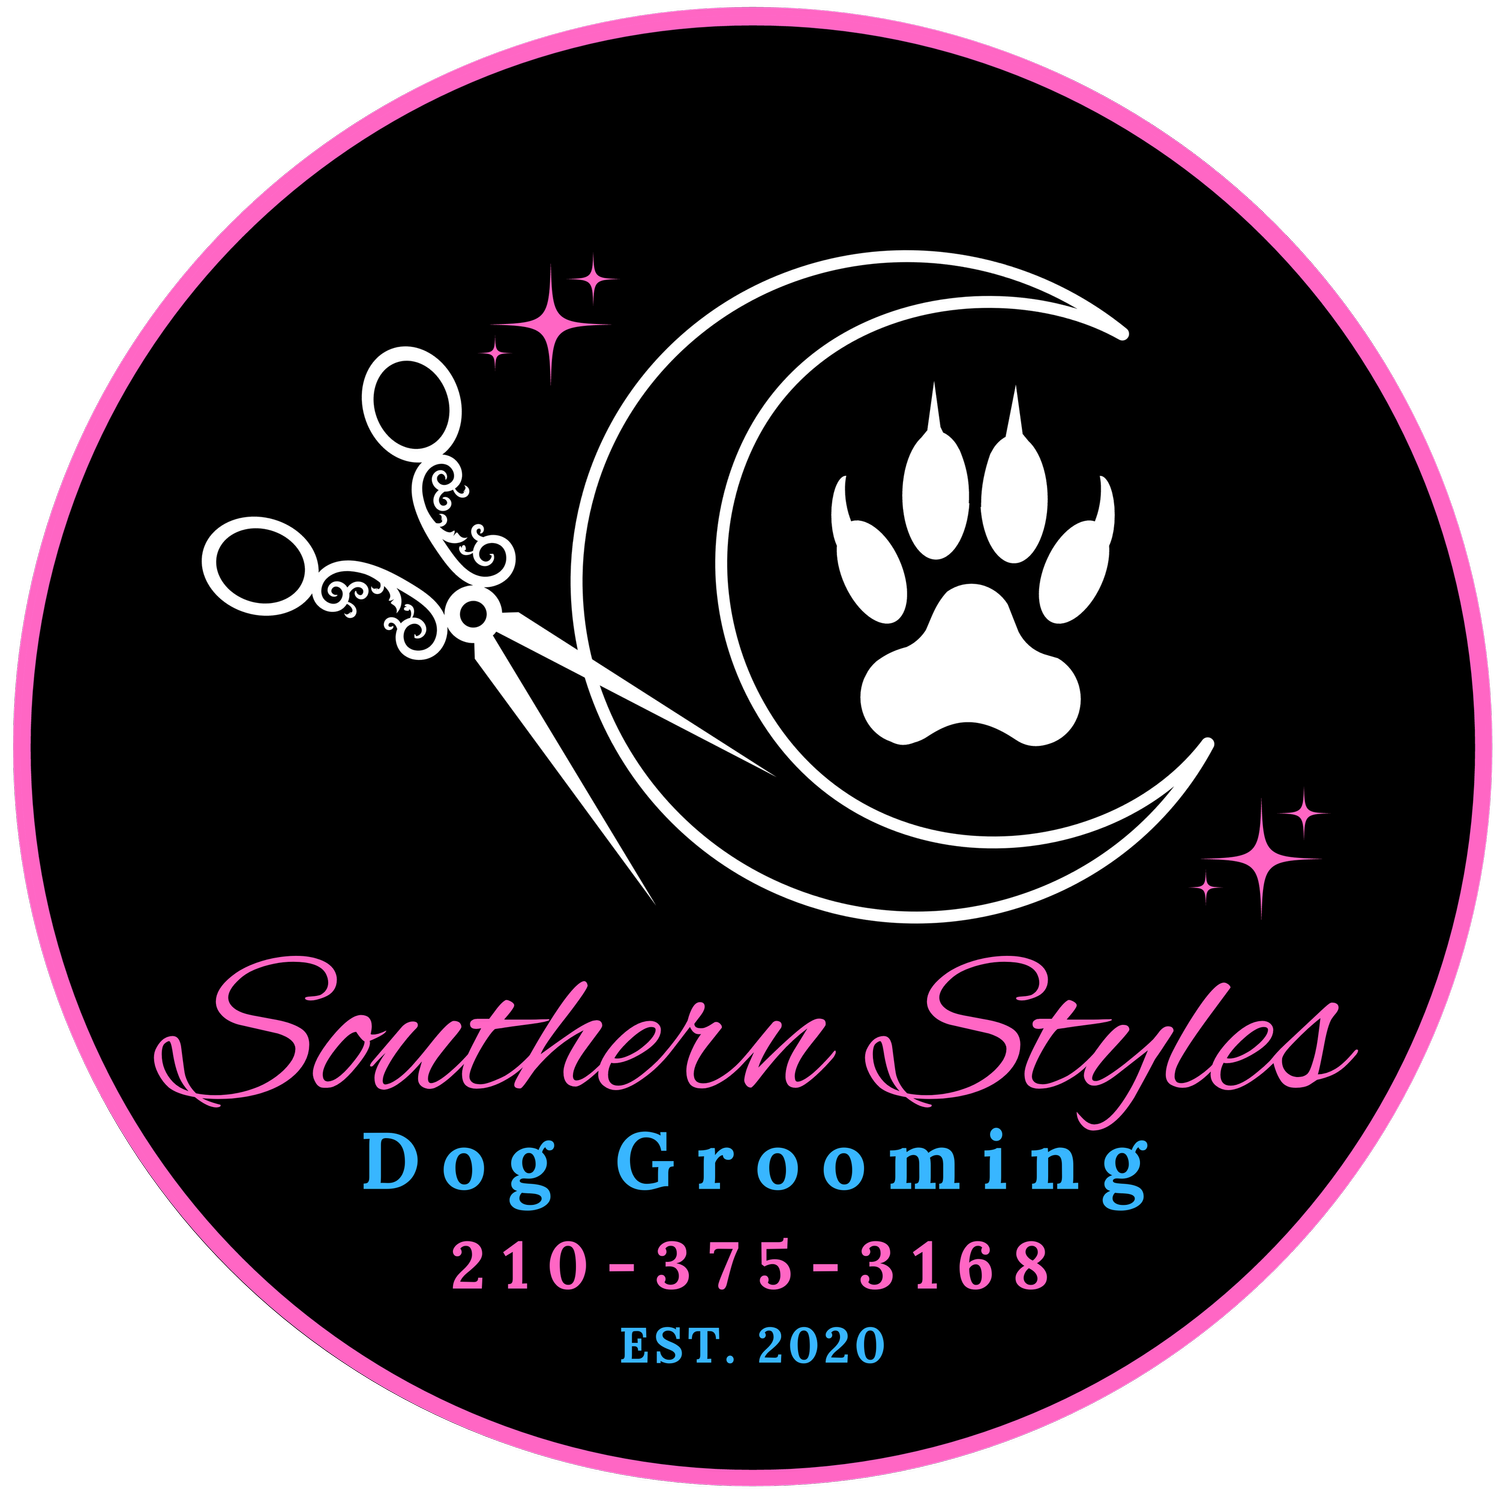 Southern Styles Dog Grooming